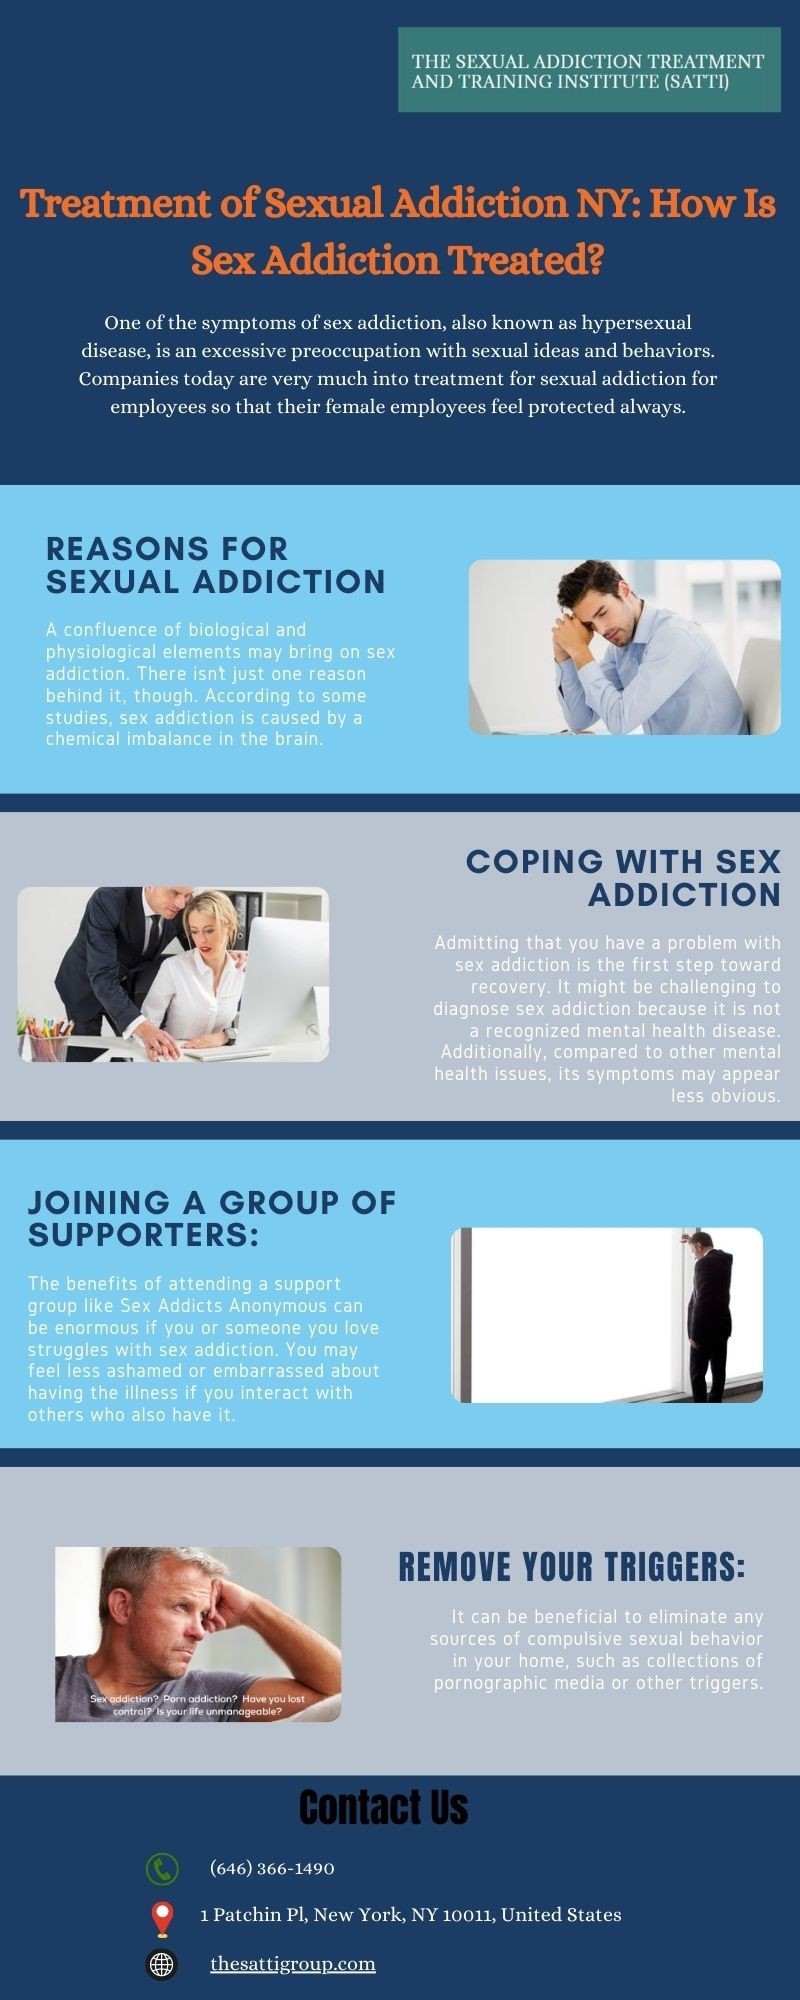 Treatment For Sexual Addiction For Employees: A Comprehensive Approach